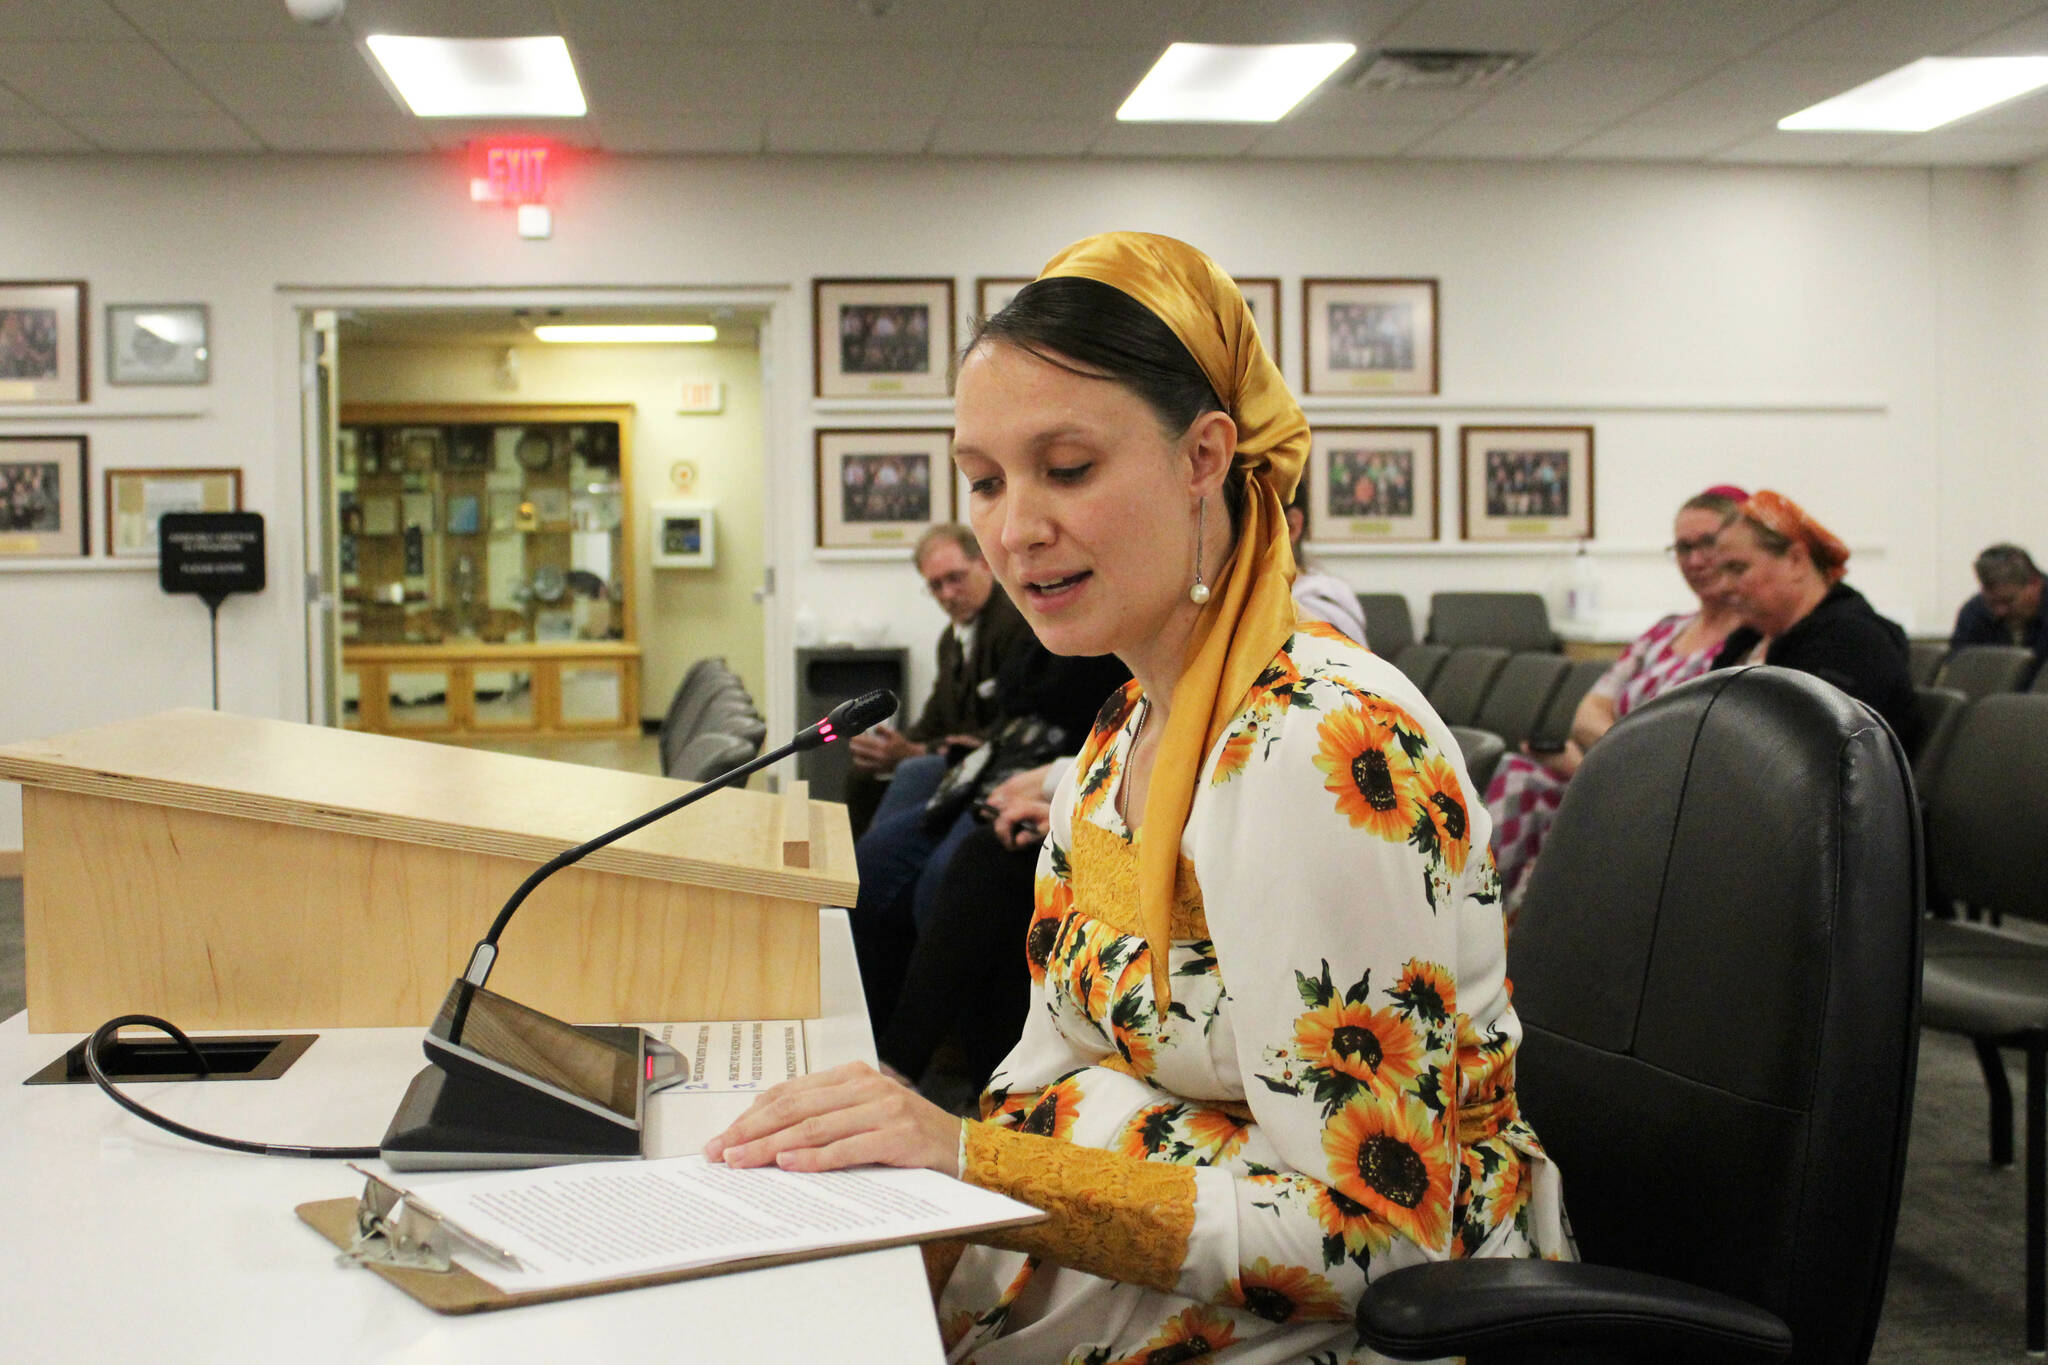 Efrosinia Yakunin, a Nikolaevsk parent, testifies in support of a charter school for the area during a board of education meeting on Monday, Oct. 3, 2022, in Soldotna, Alaska. (Ashlyn O’Hara/Peninsula Clarion)